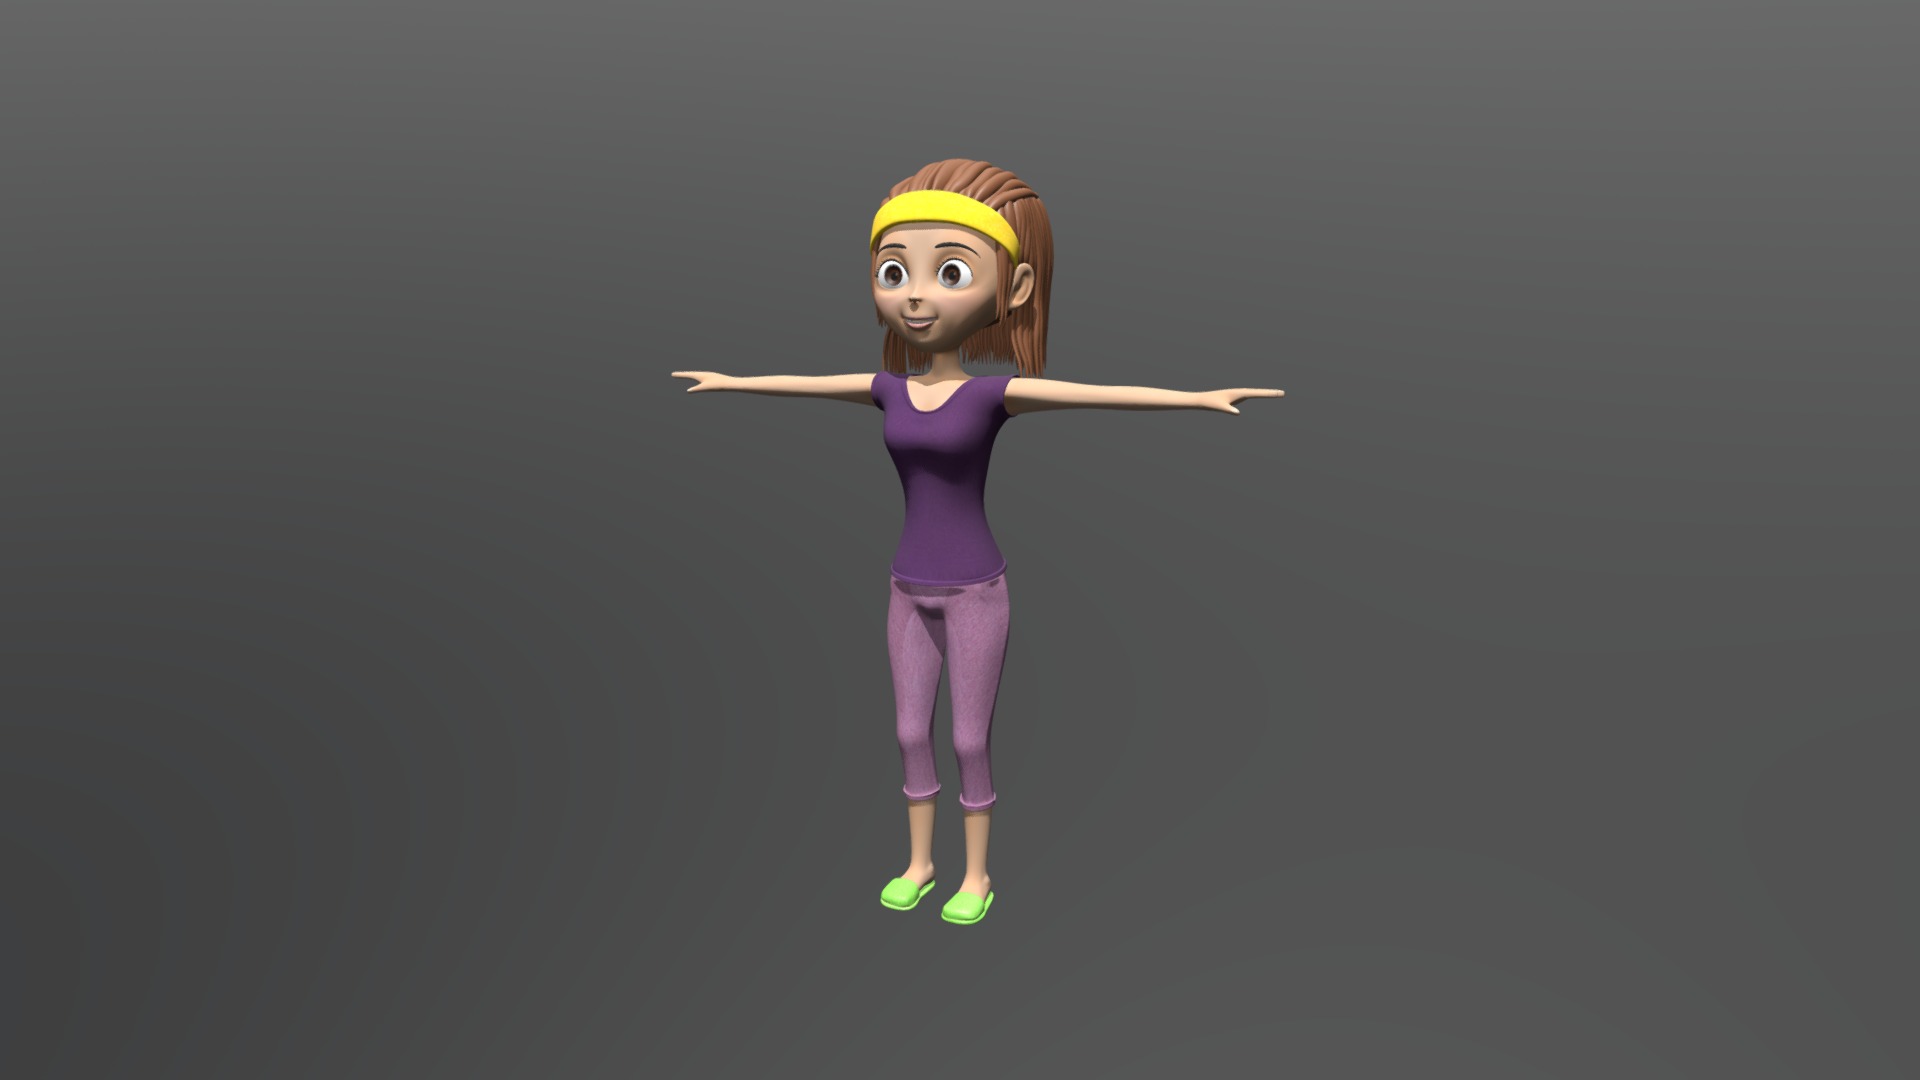 3D model Wanita - This is a 3D model of the Wanita. The 3D model is about a toy doll with a yellow headband and a purple dress.